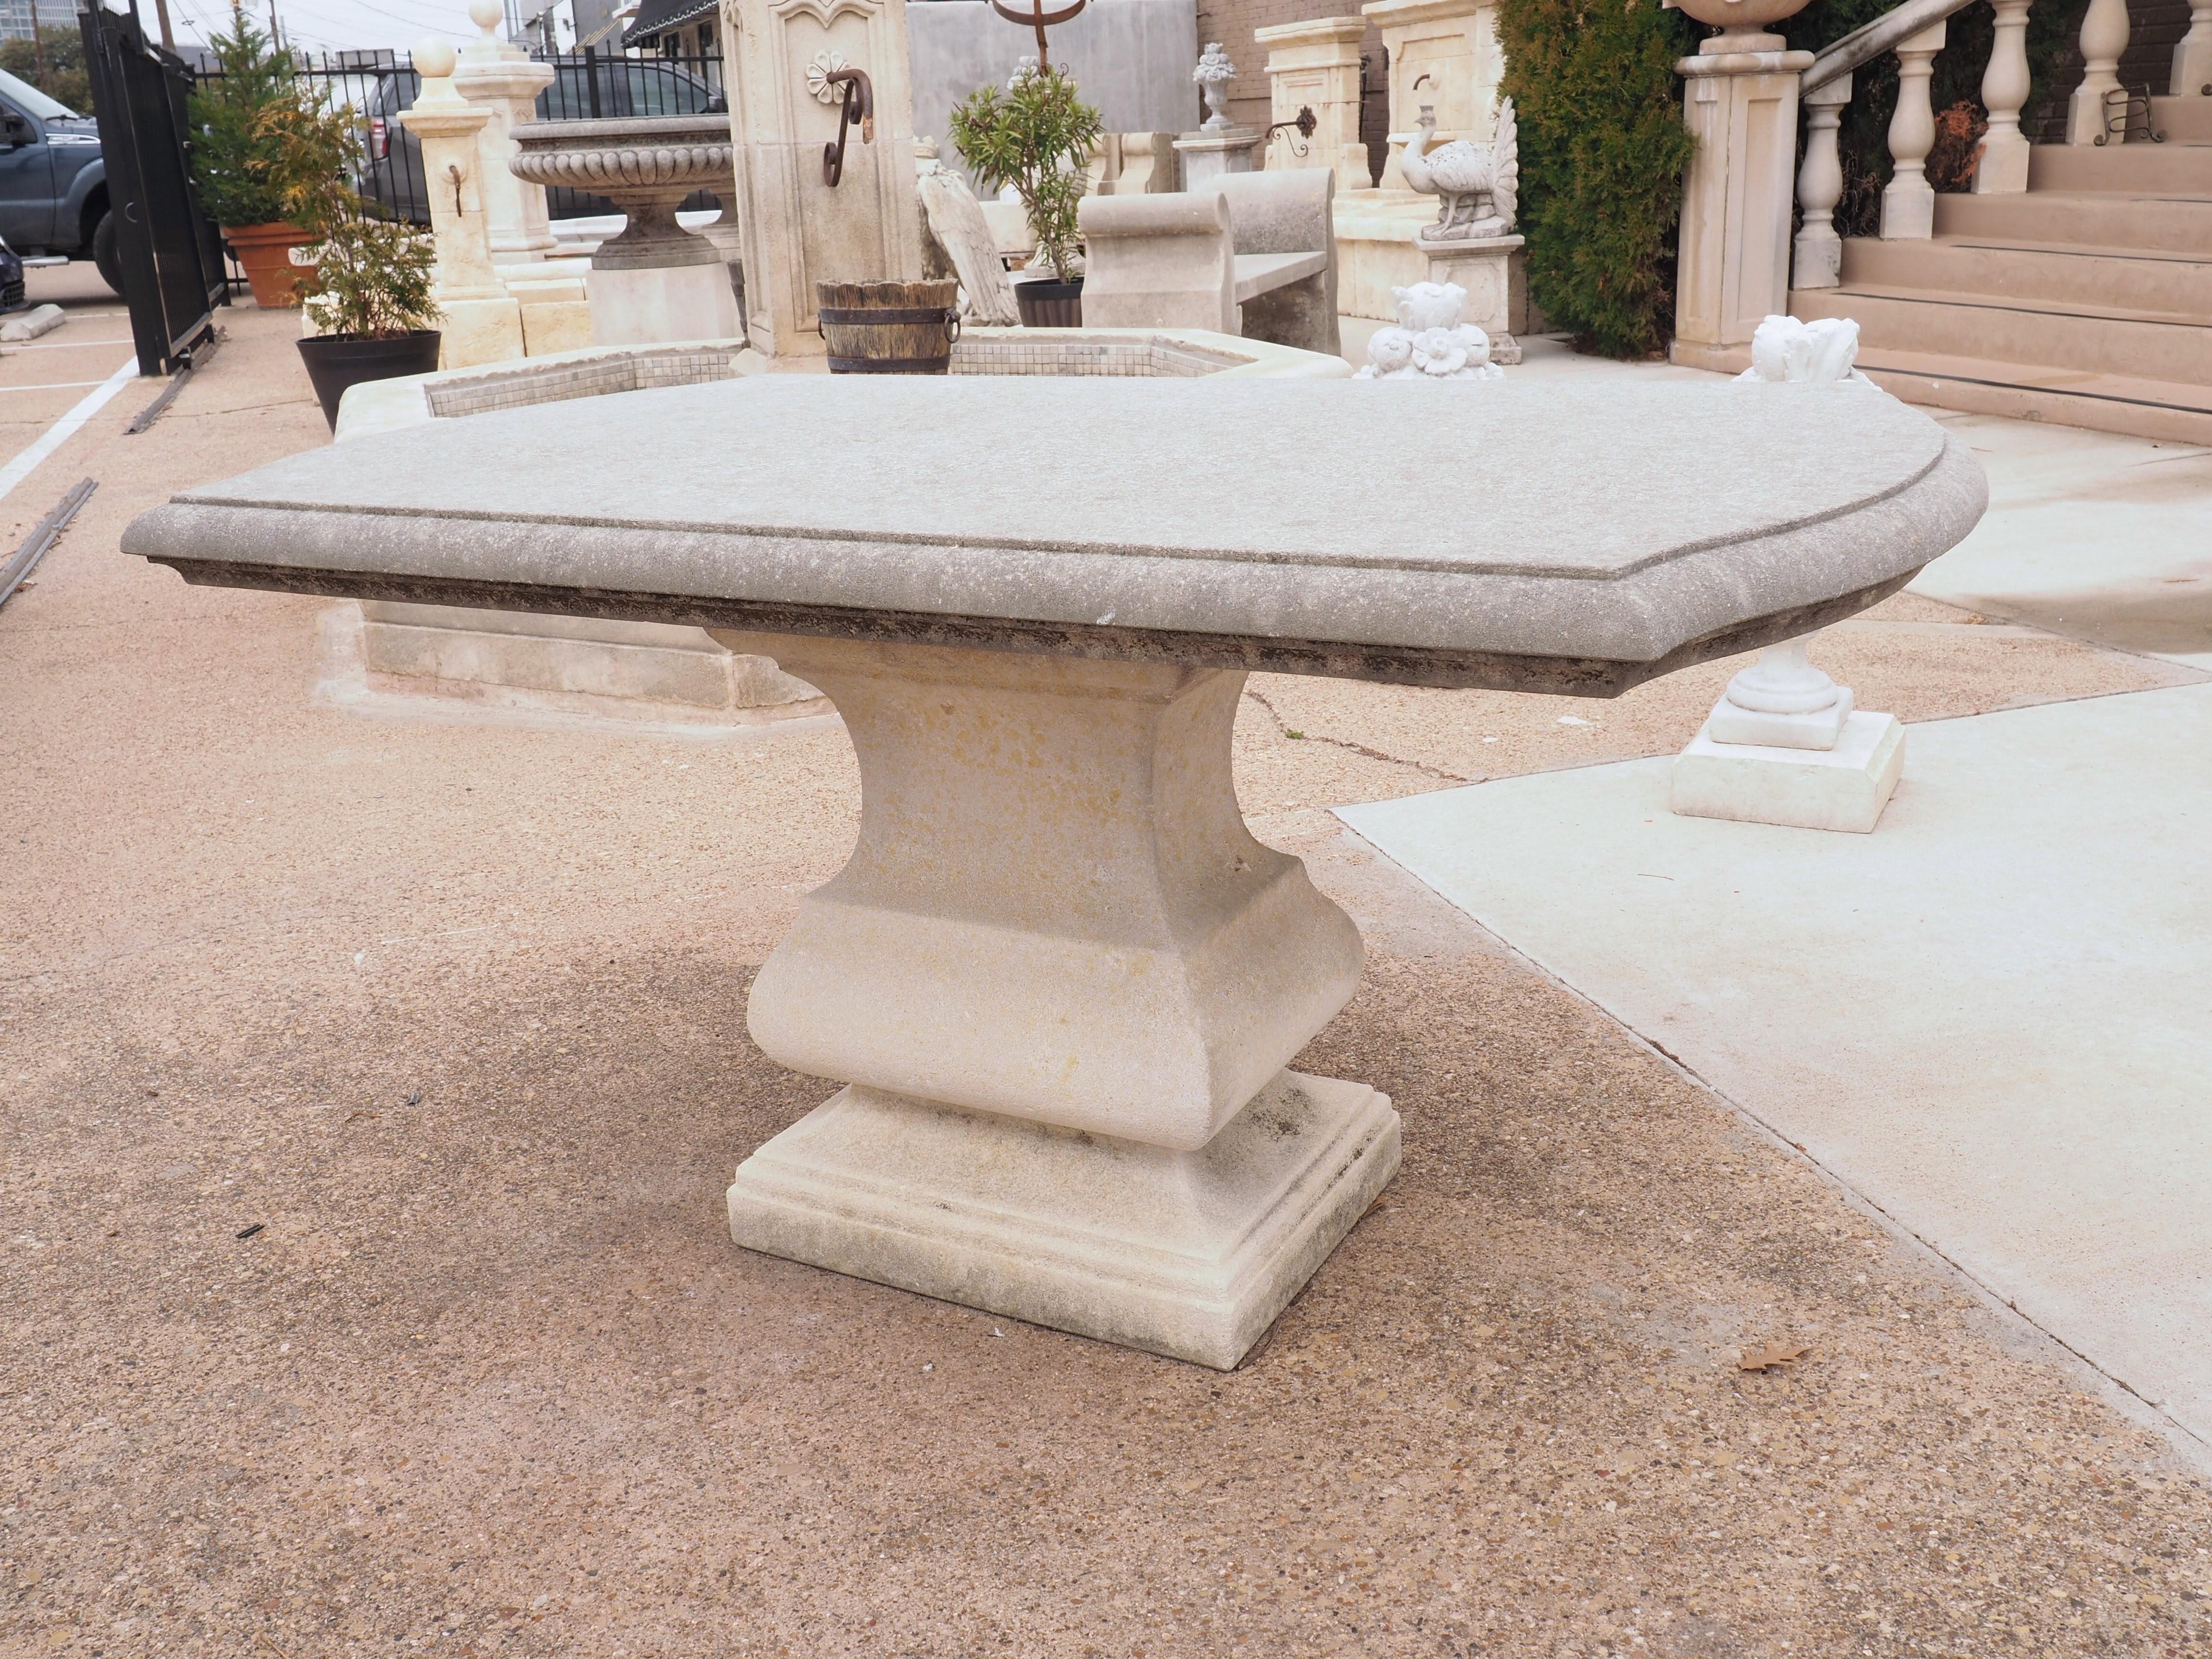 This table is made of carved Italian stone (not cast). It has been outdoors for the past few years, earning an authentic and aged patina, as evidenced by the darker surfaces and more pale support sections. The top is a gently curved rectangle paired